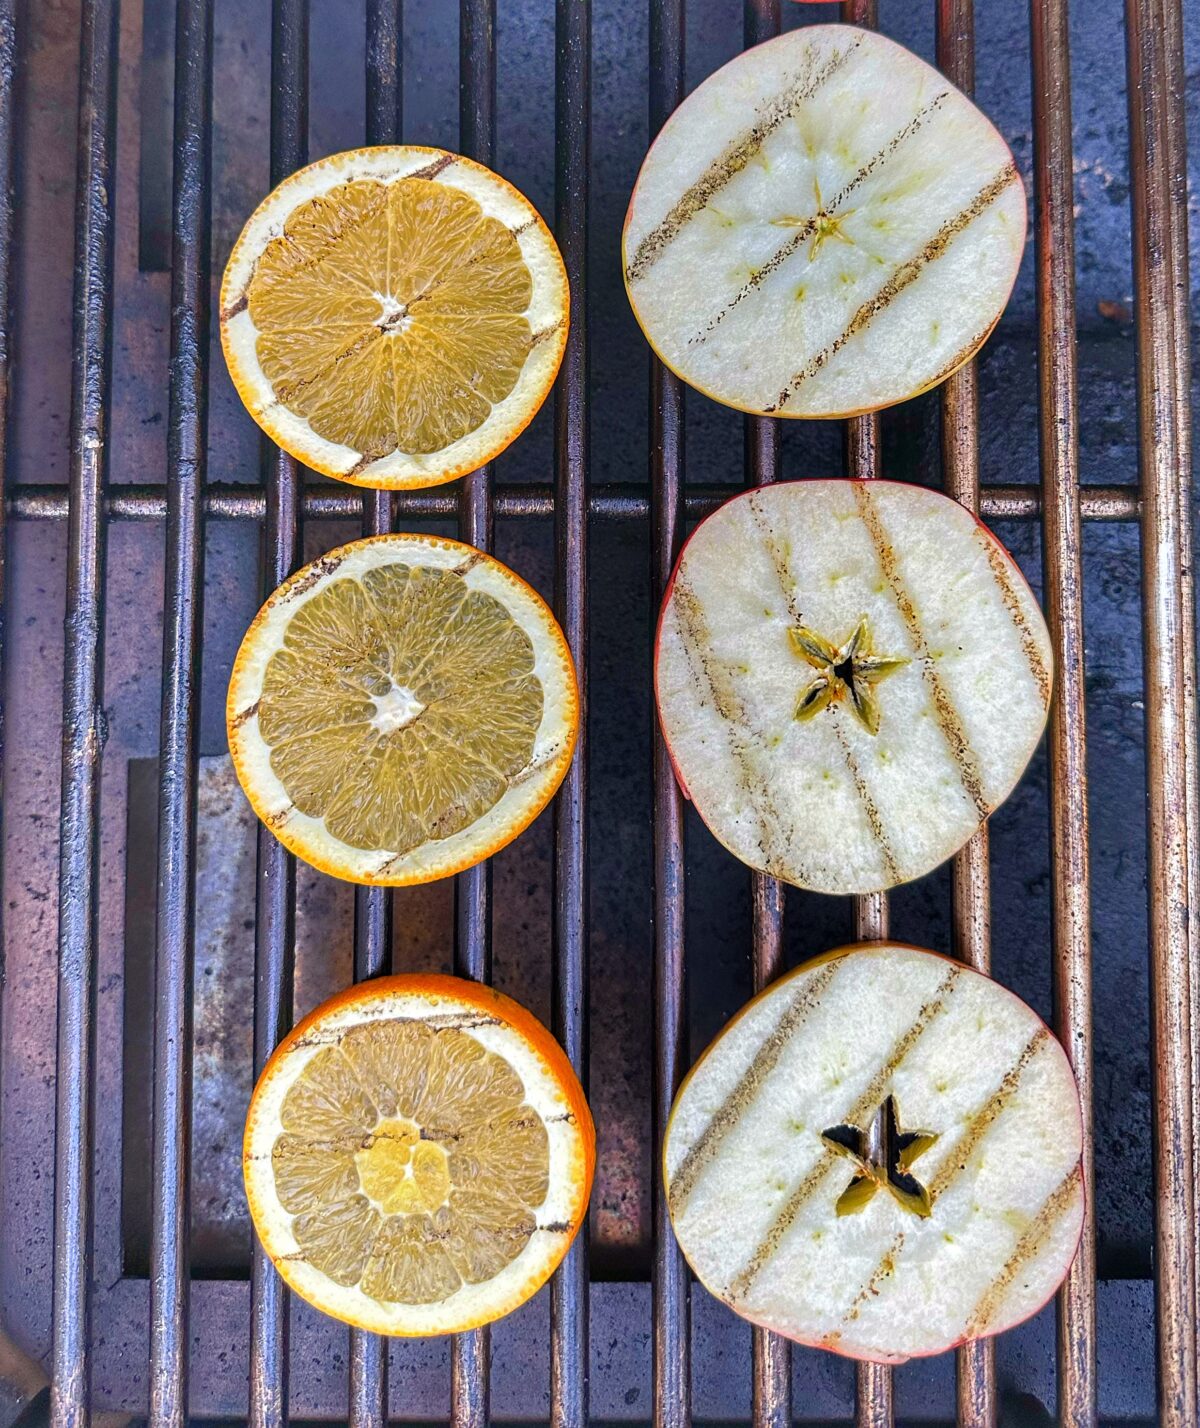 Fruit on the grill for garnish